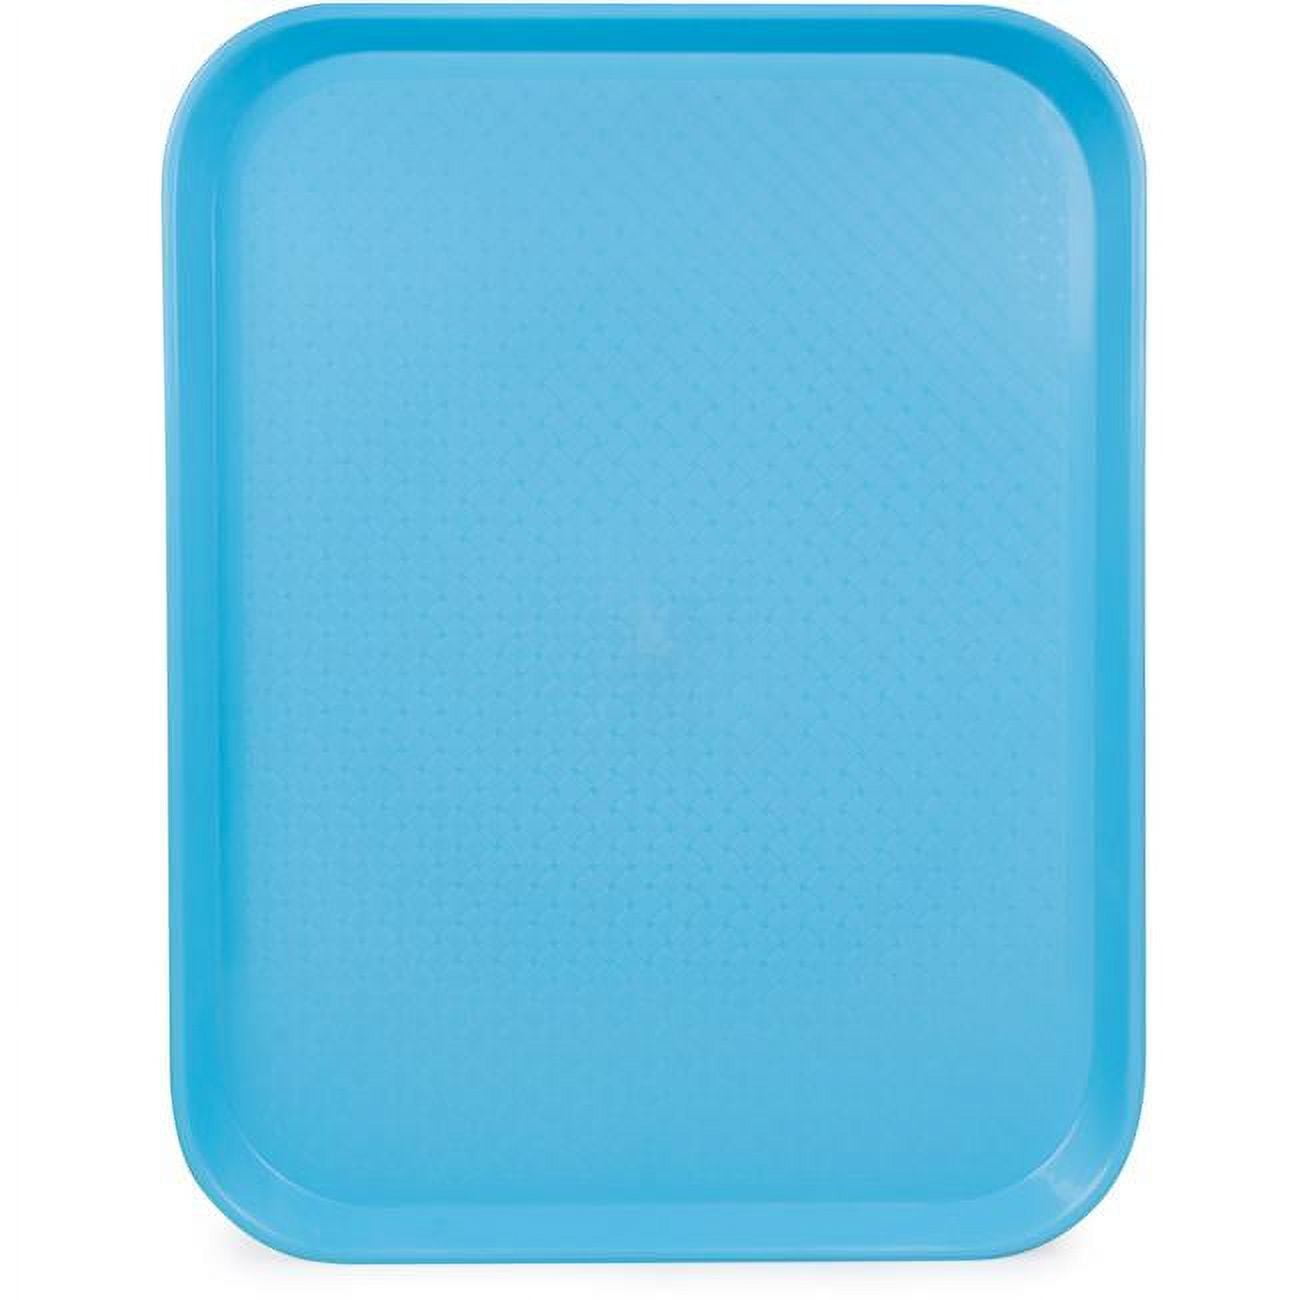 Brybelly Kcaf-402 Textured Cafeteria Tray with Handles, Blue - Small